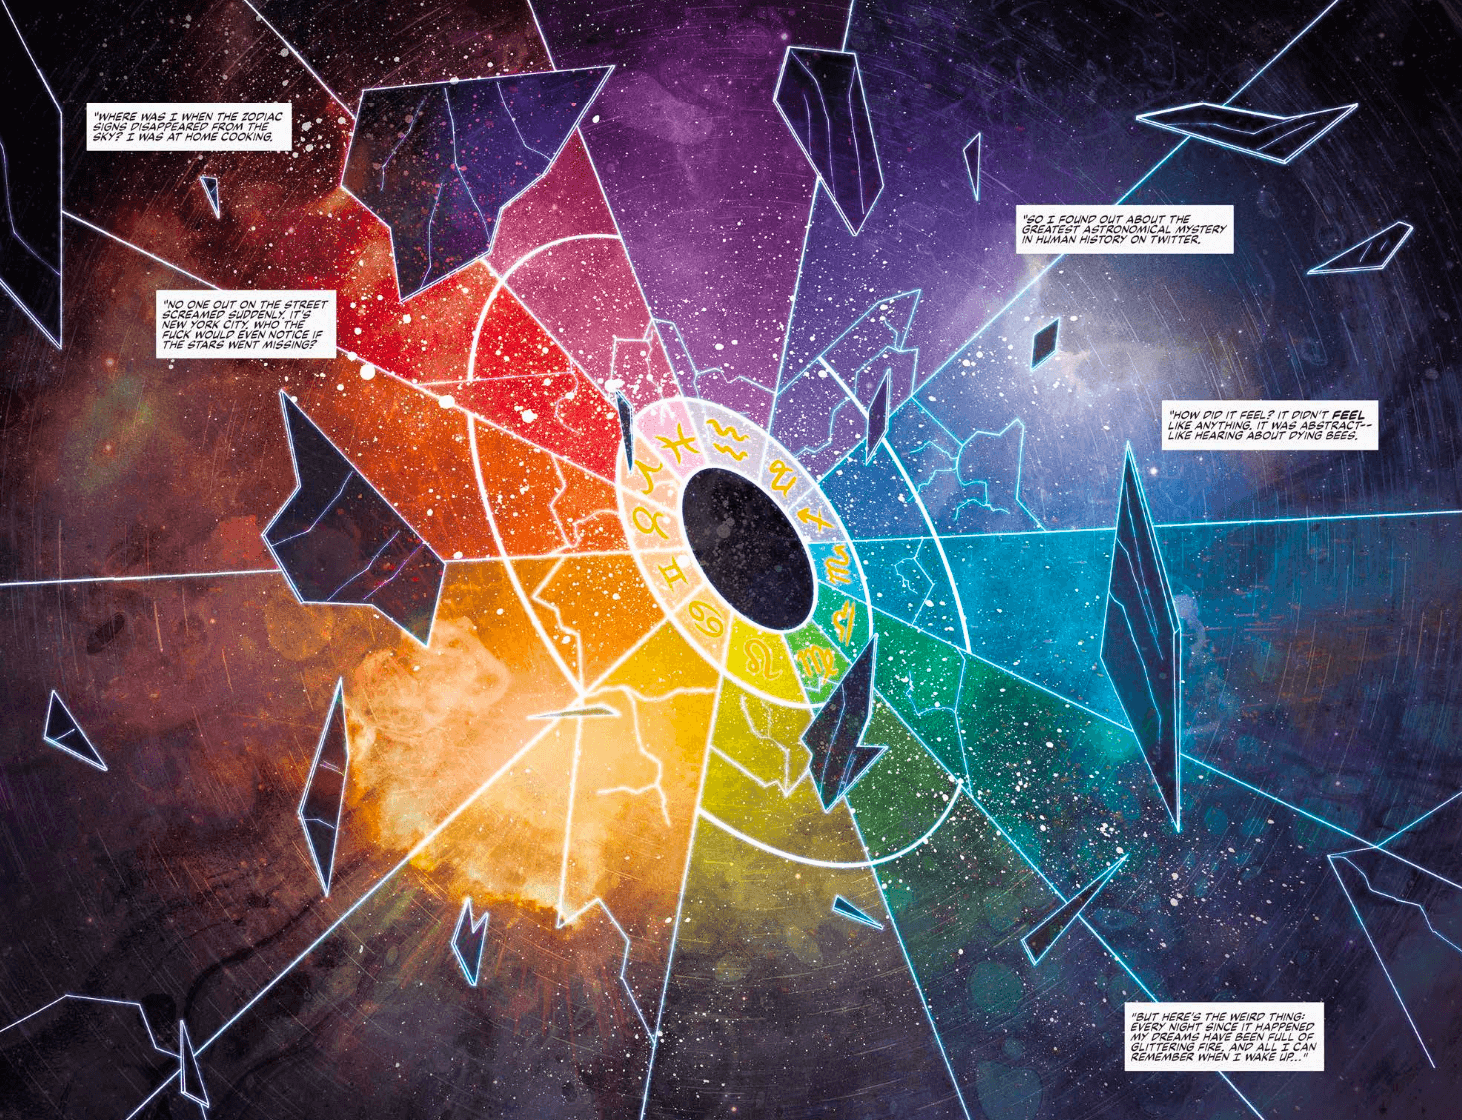 Two page spread in Starsigns #1 by writer Saladin Ahmed and artist Megan Levens depicting a rainbow zodiac wheel shattering across space